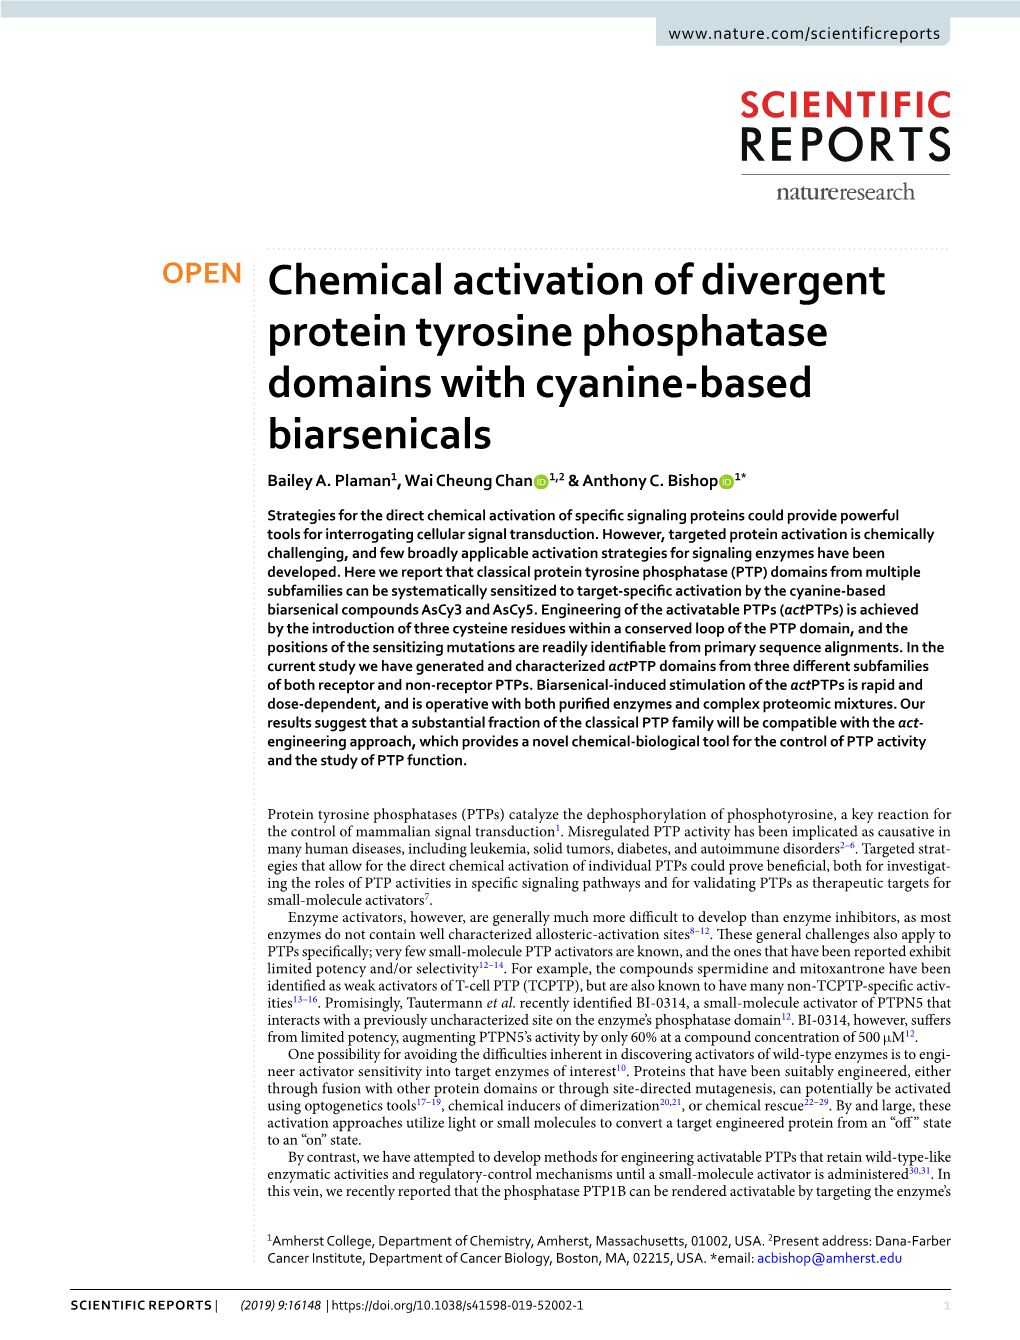 Chemical Activation of Divergent Protein Tyrosine Phosphatase Domains with Cyanine-Based Biarsenicals Bailey A